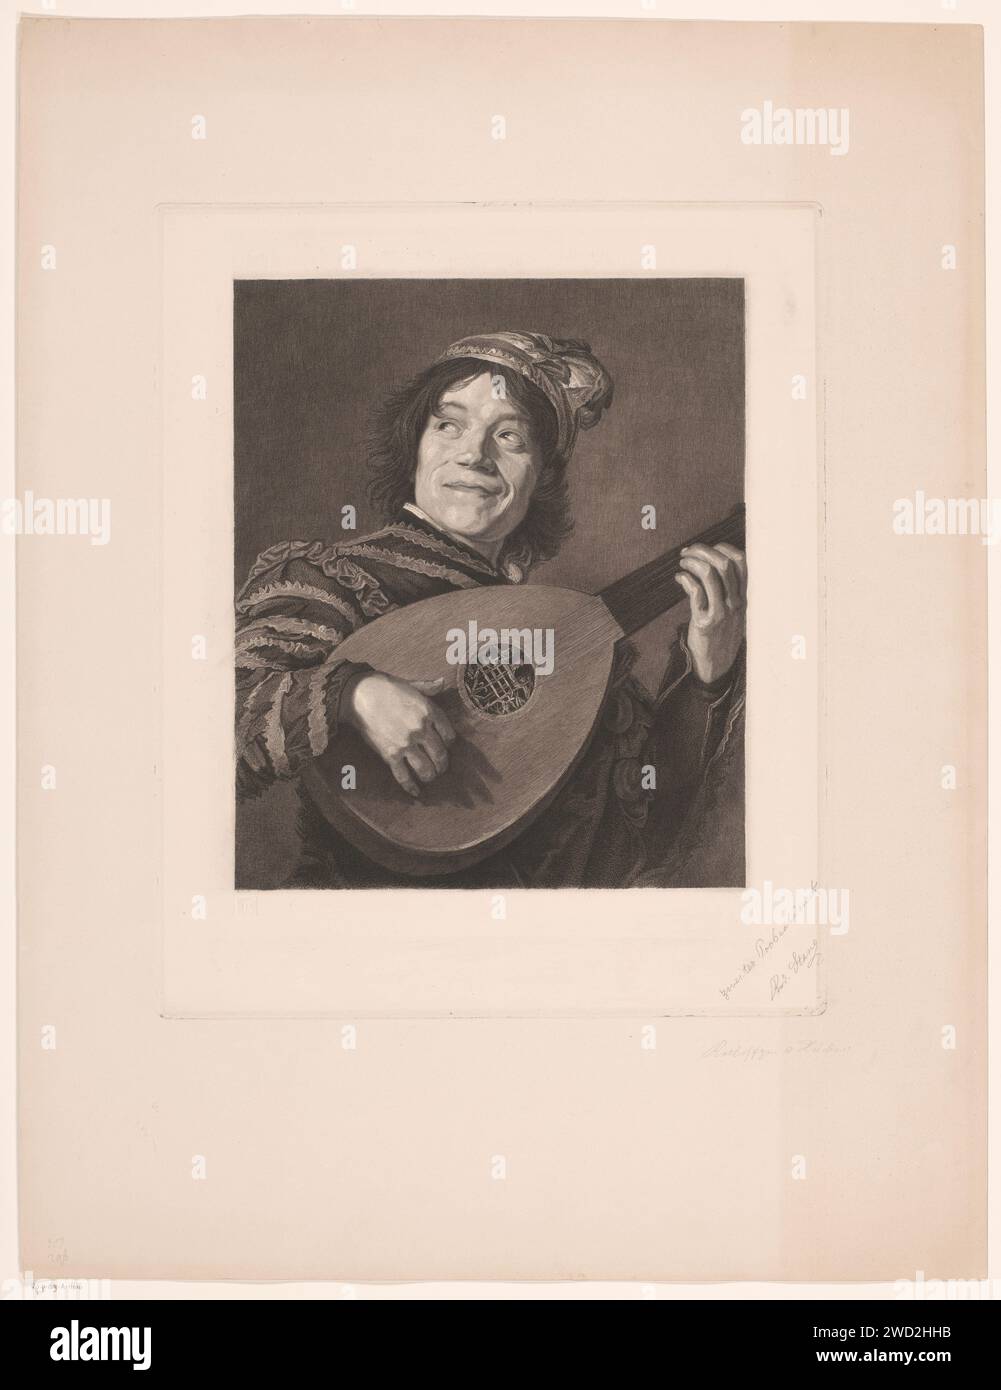 Luitspeler, Rudolf Stang, after Frans Hals, 1841 - 1891 print   paper. etching court jester, court fool. lute, and special forms of lute, e.g.: theorbo Stock Photo